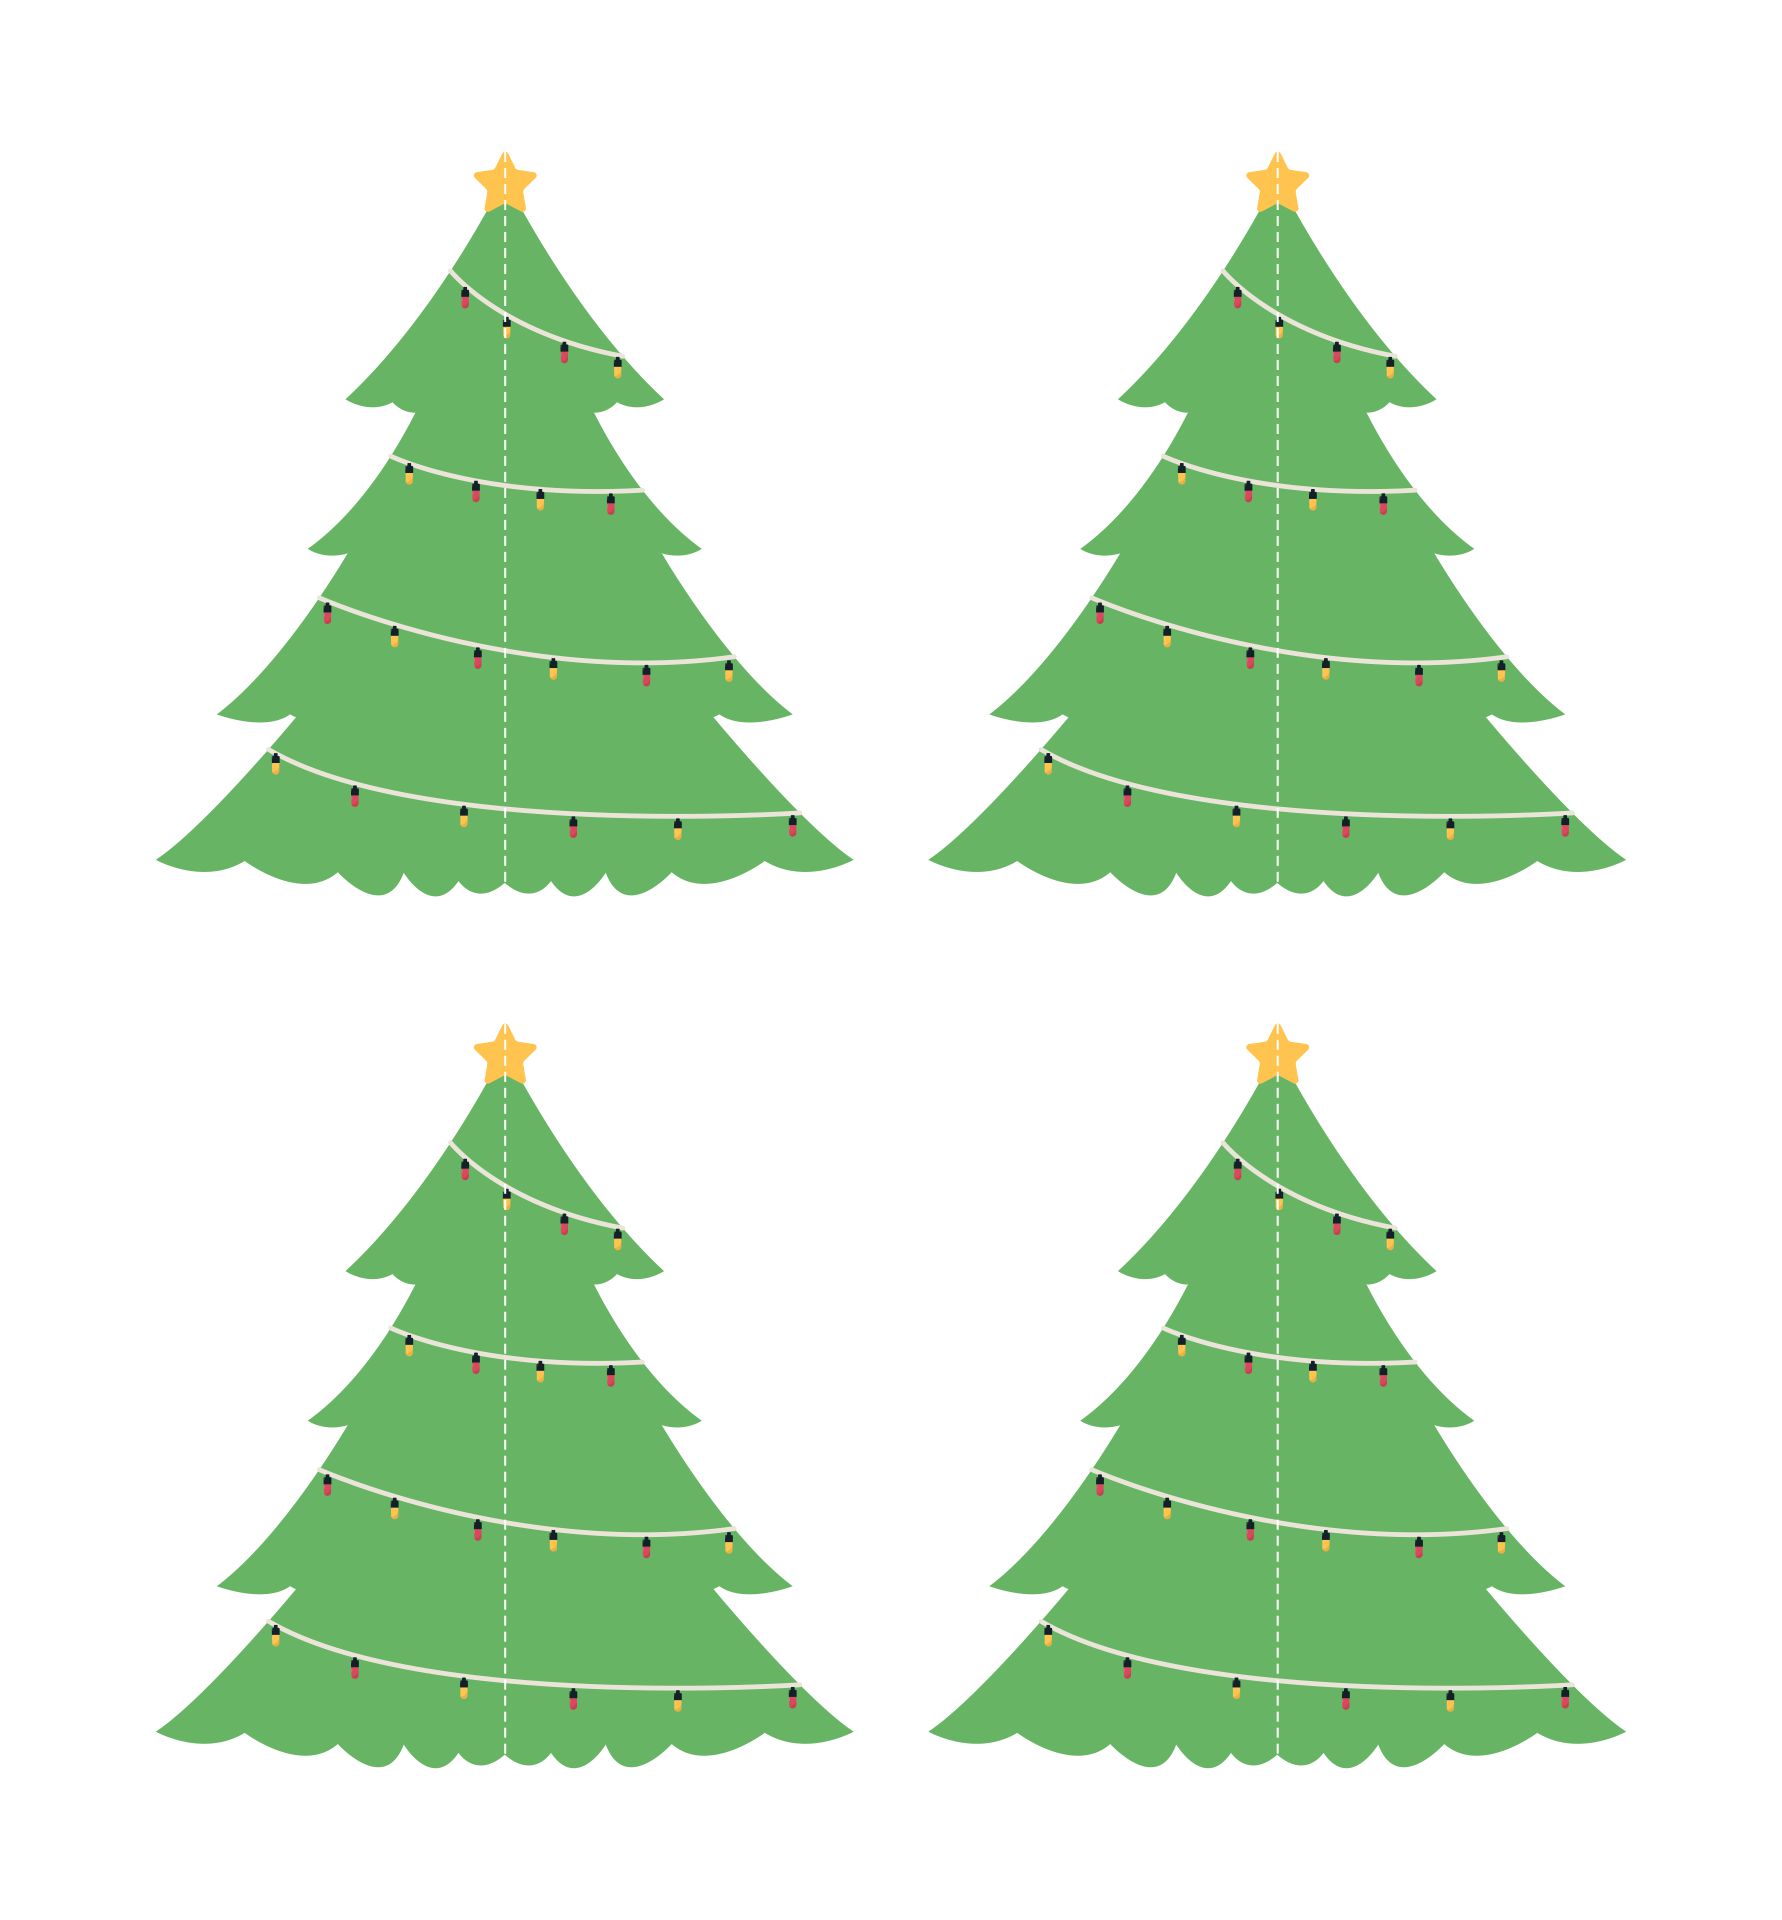 3D Christmas Paper Crafts Templates